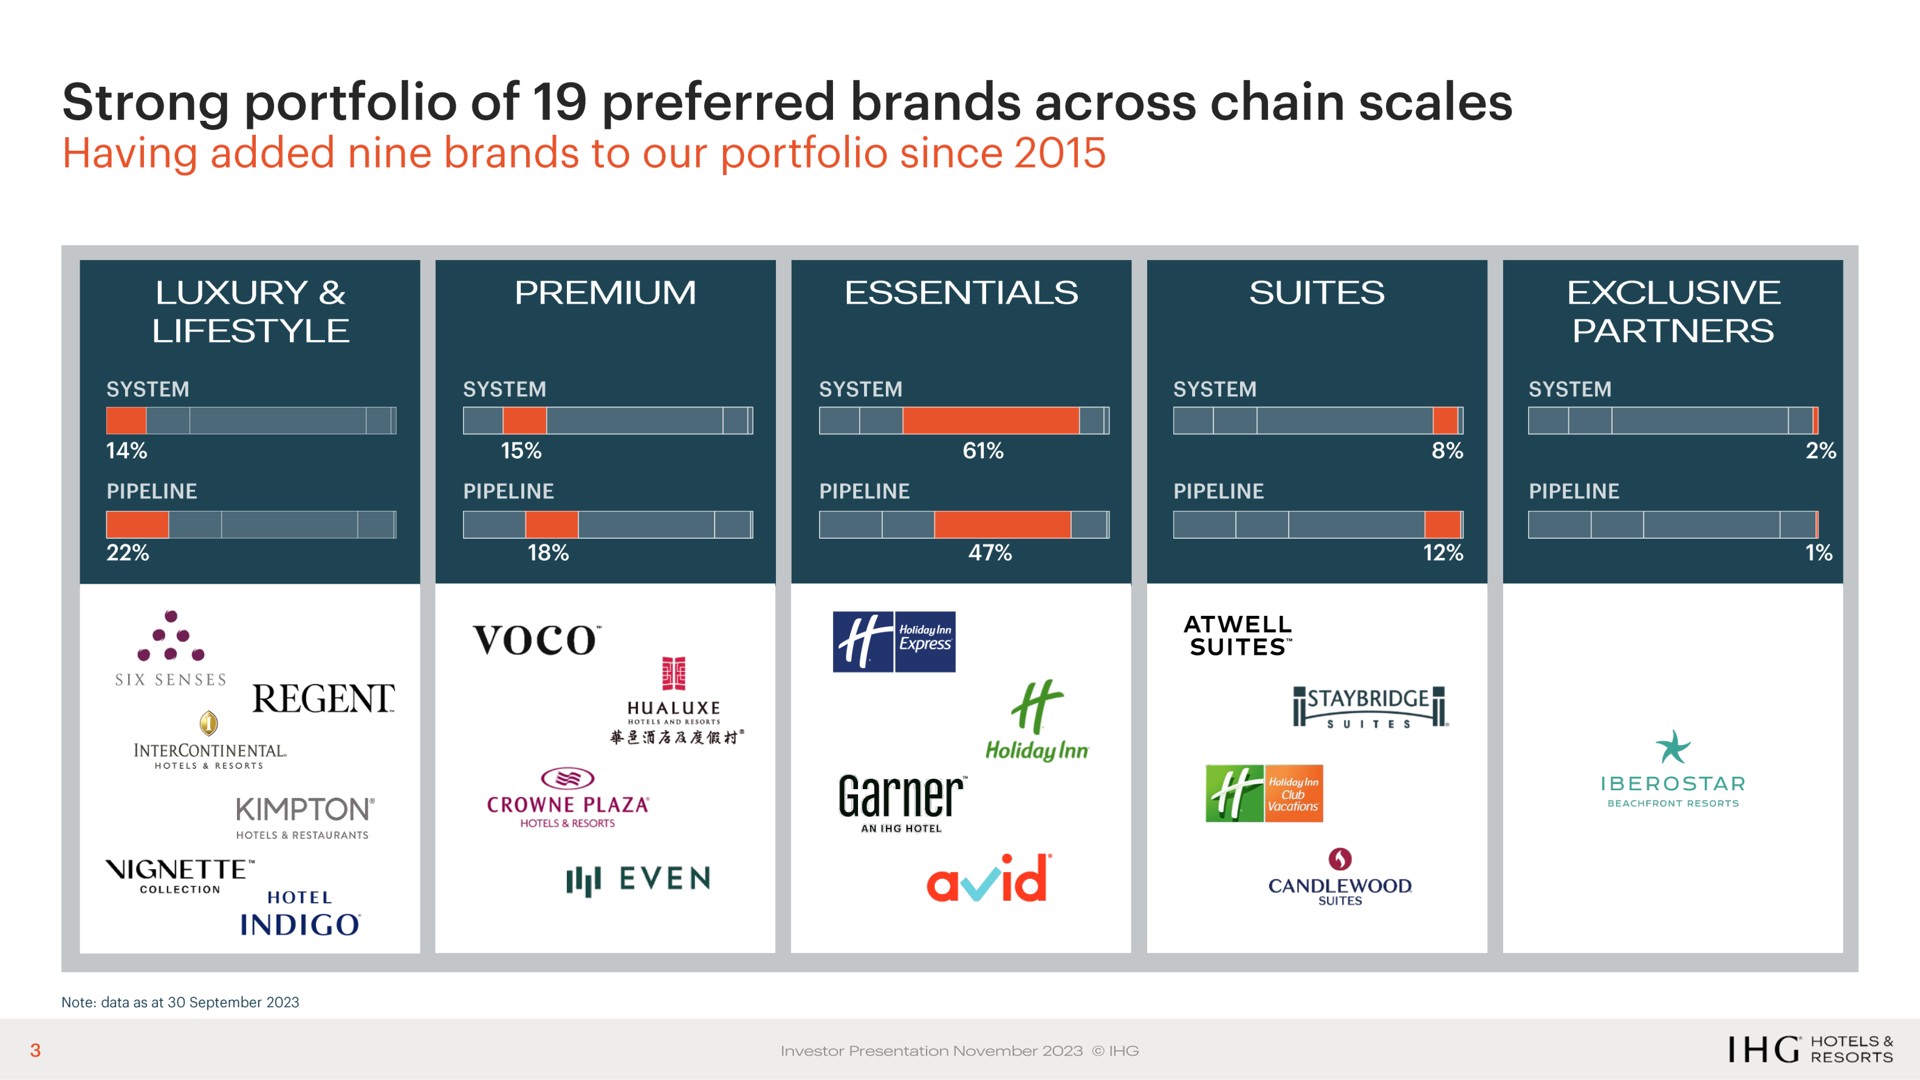 strong portfolio of preferred brands across chain scales even avid | IHG Hotels